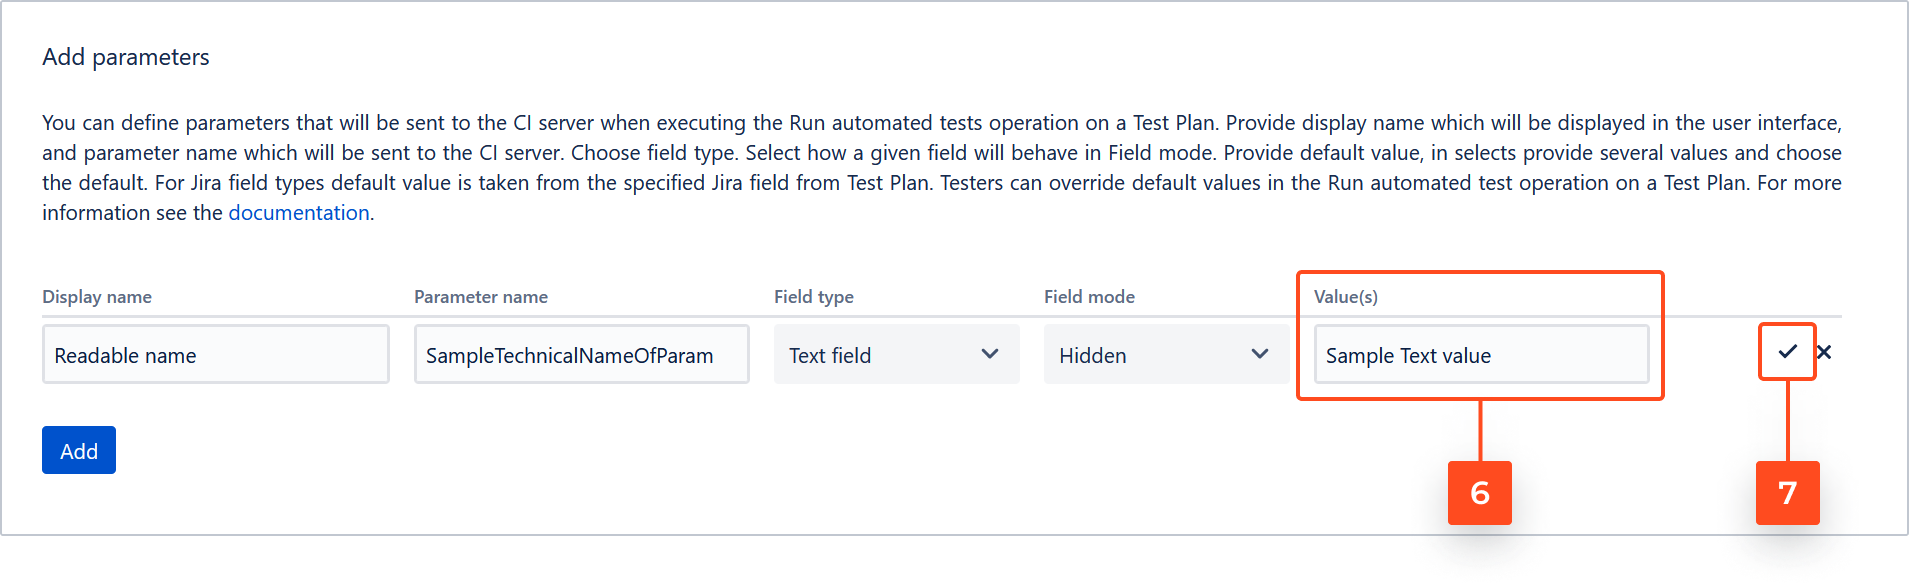 Additional parameters in Run automated tests operation